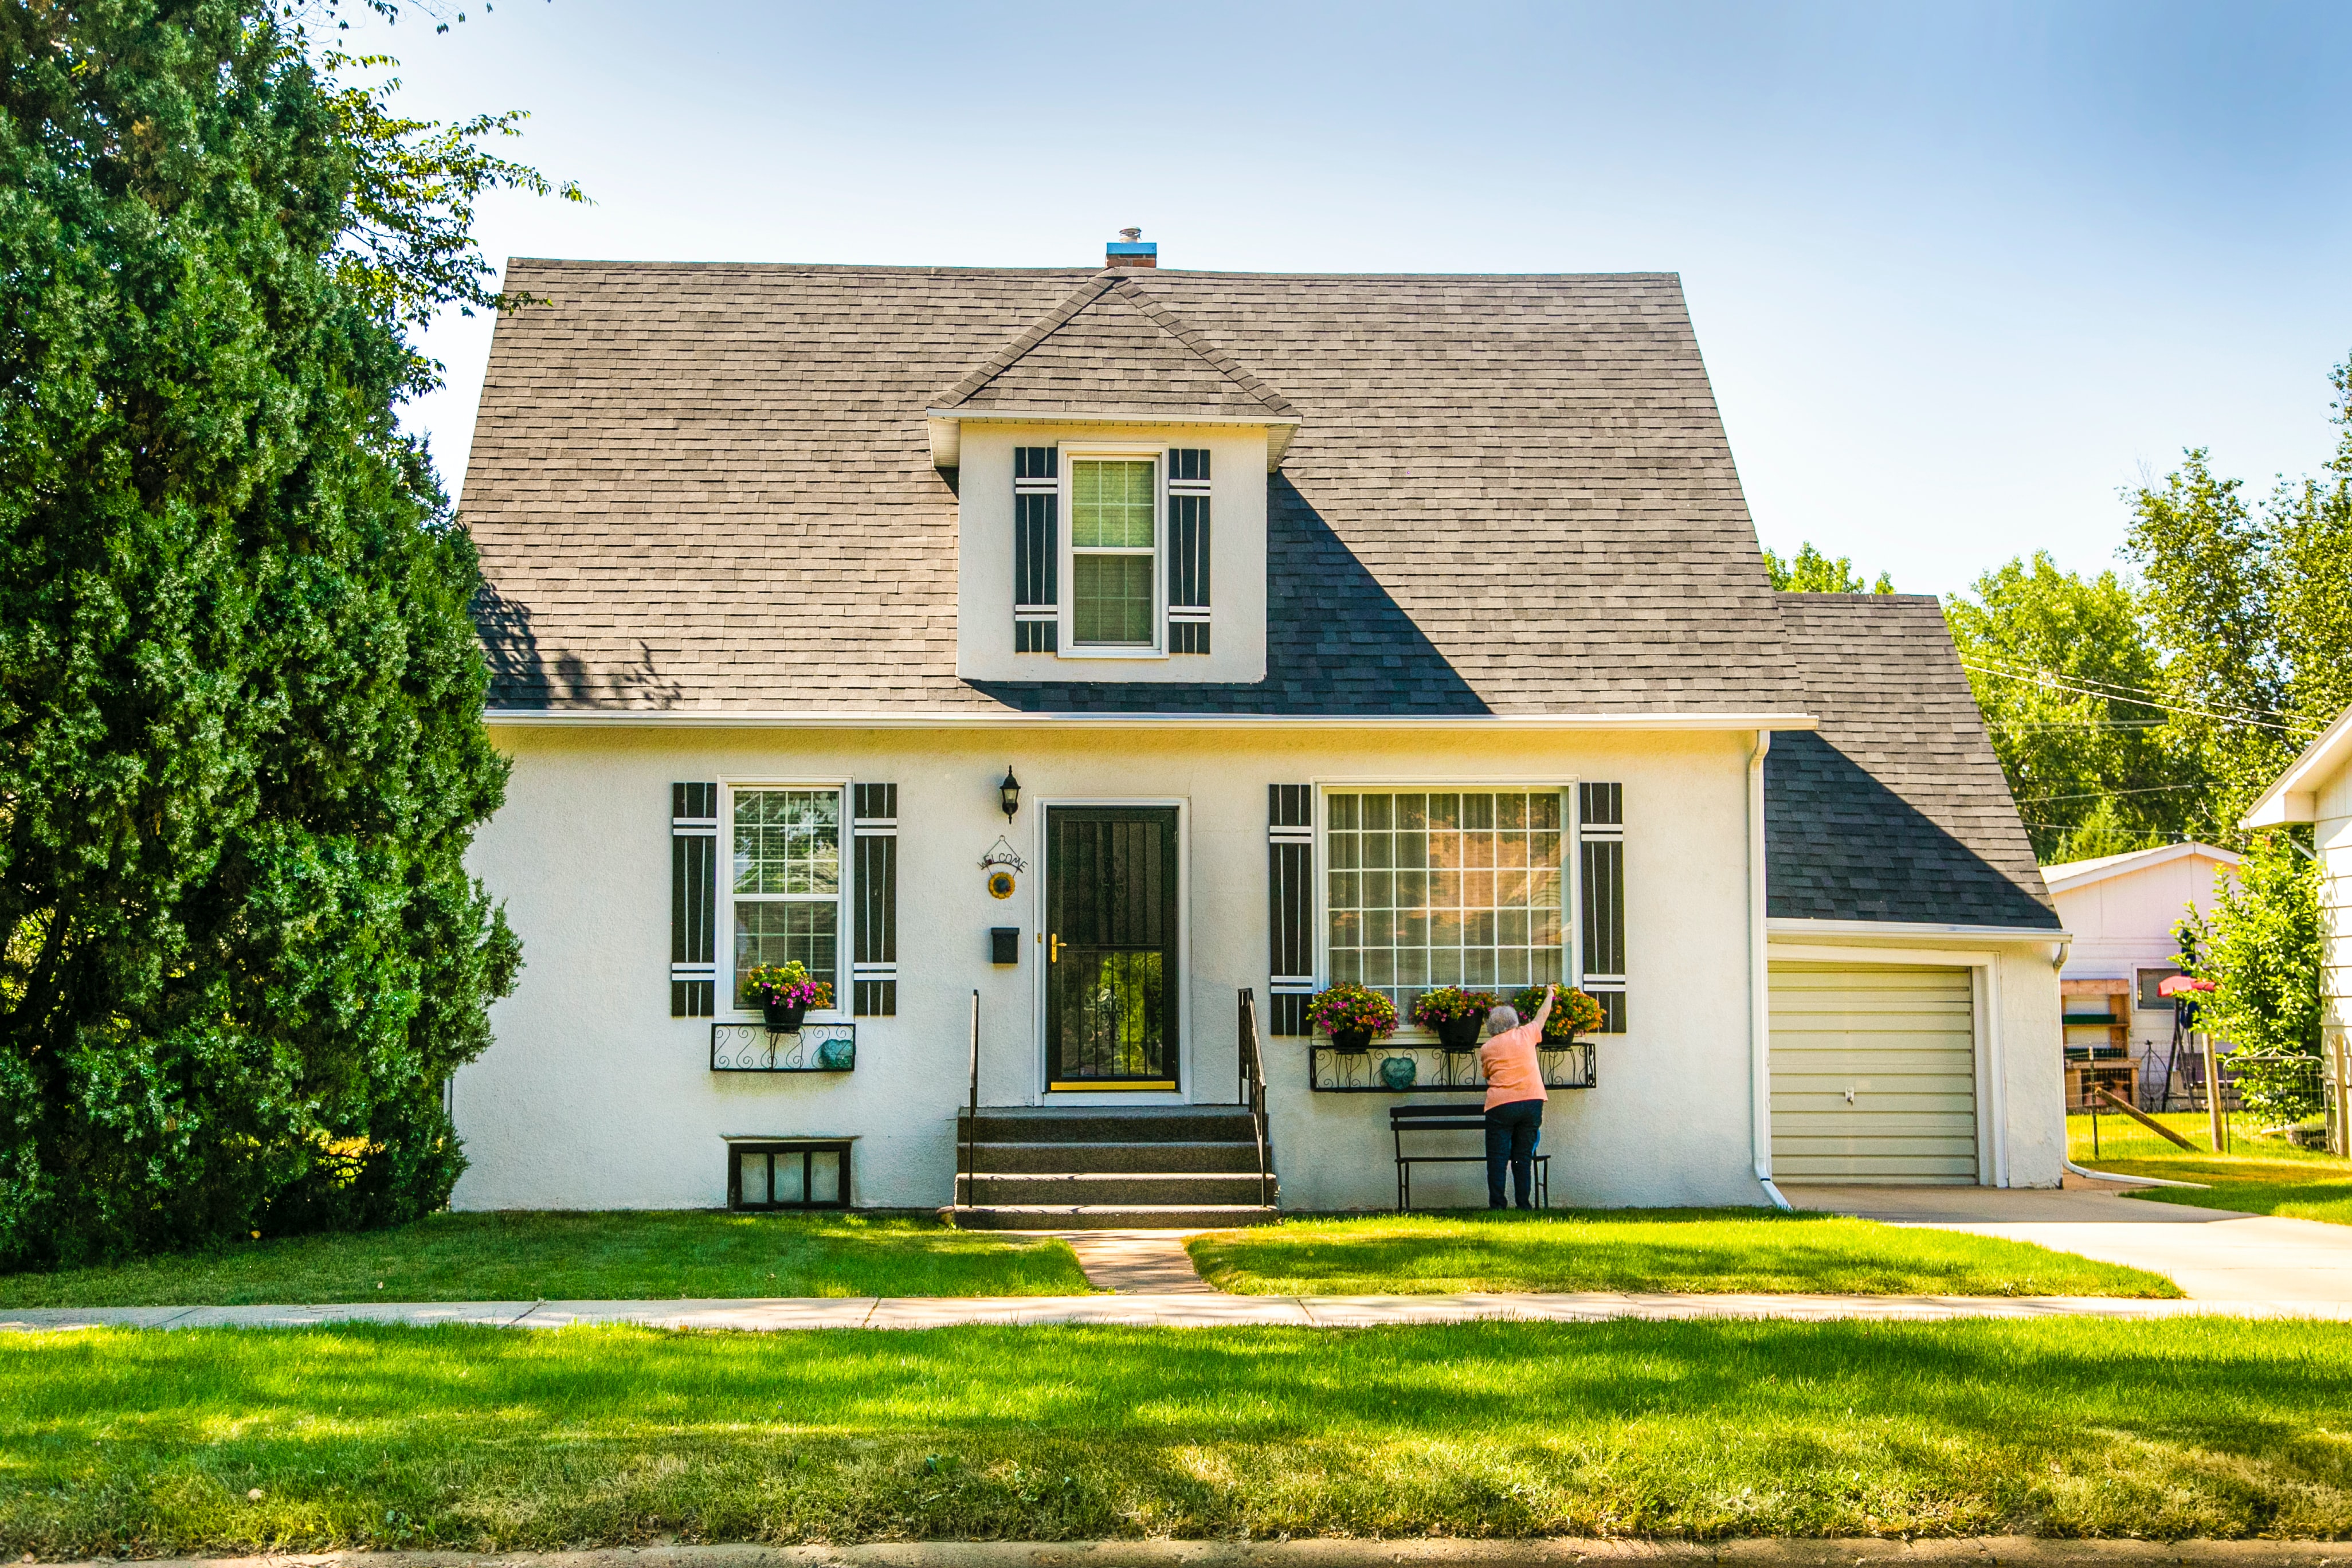 How To Boost Your Home's Curb Appeal